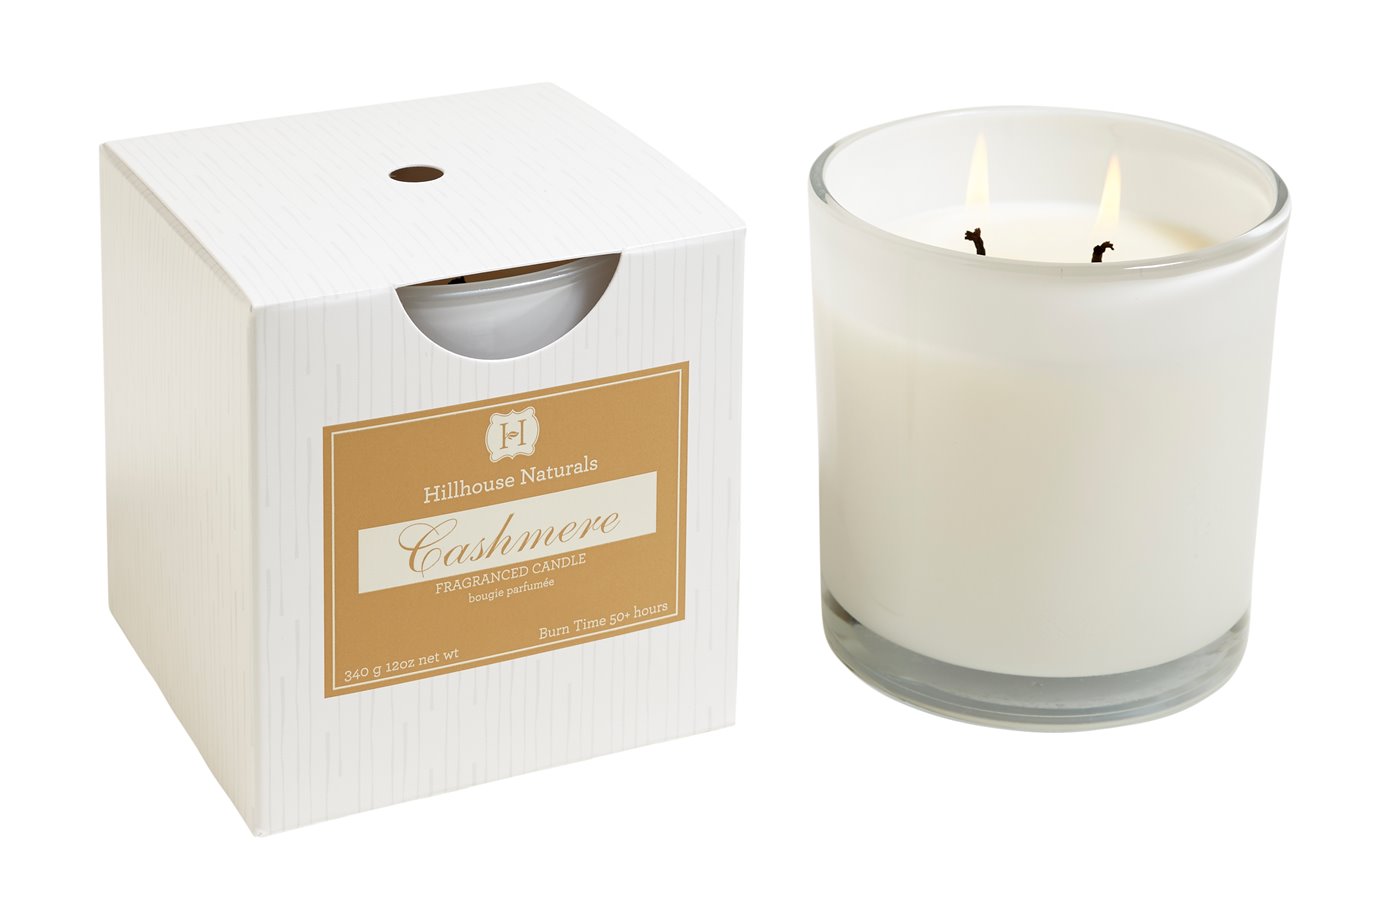 Cashmere 2 Wick Candle In White Glass 12 oz by Hillhouse Naturals